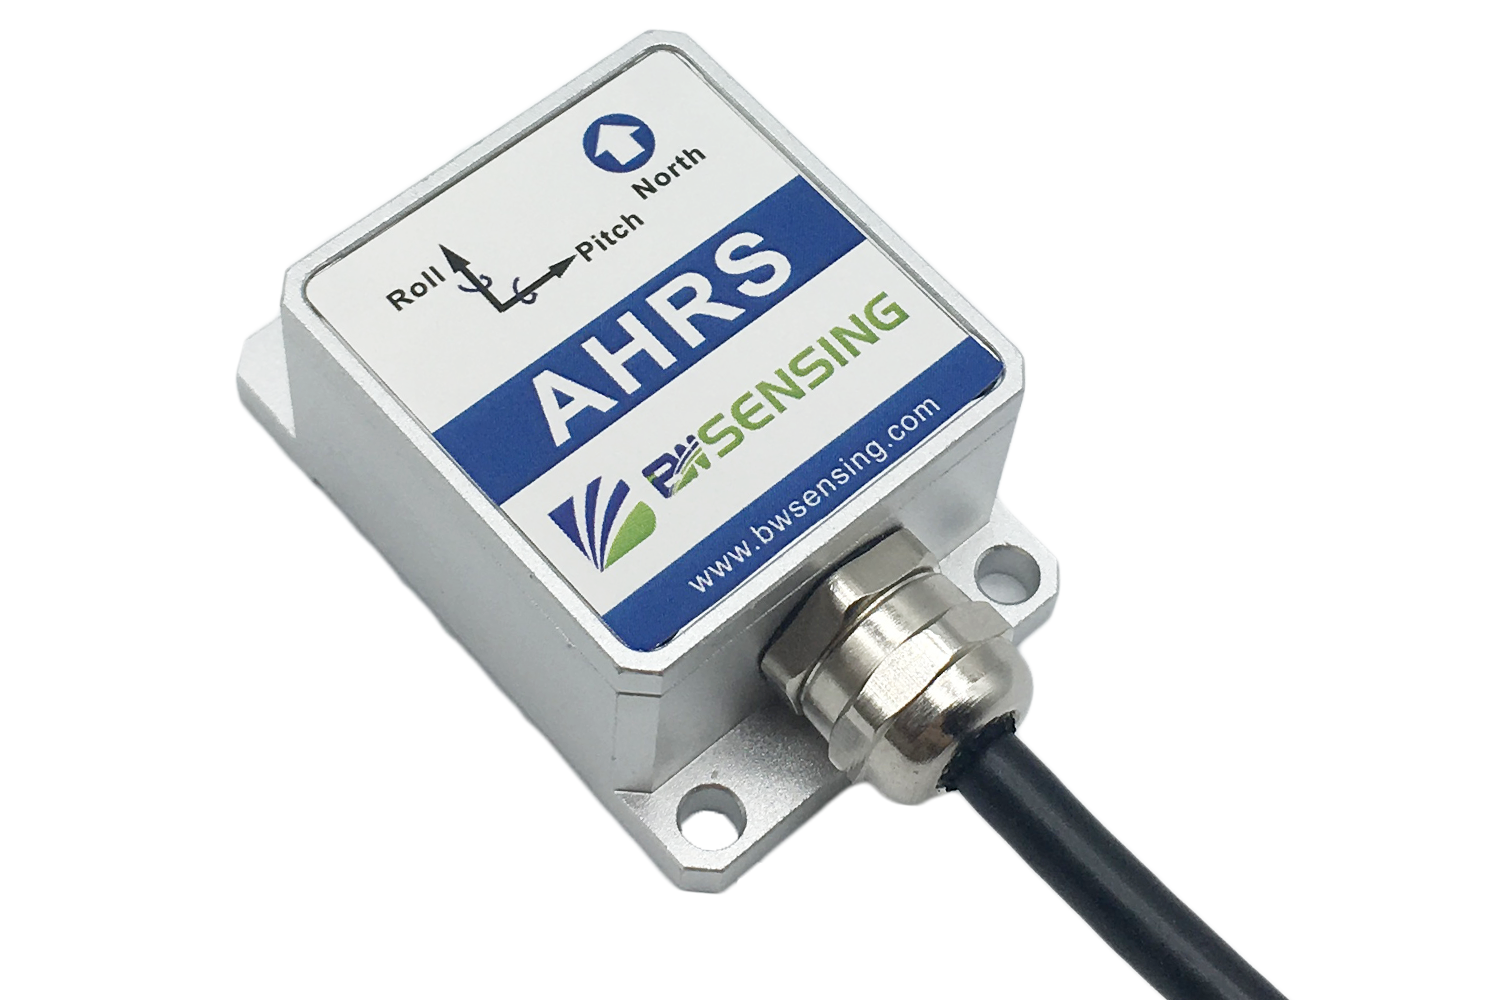 BWSENSING Low cost CAN bus Attitude and Heading Reference System AH125